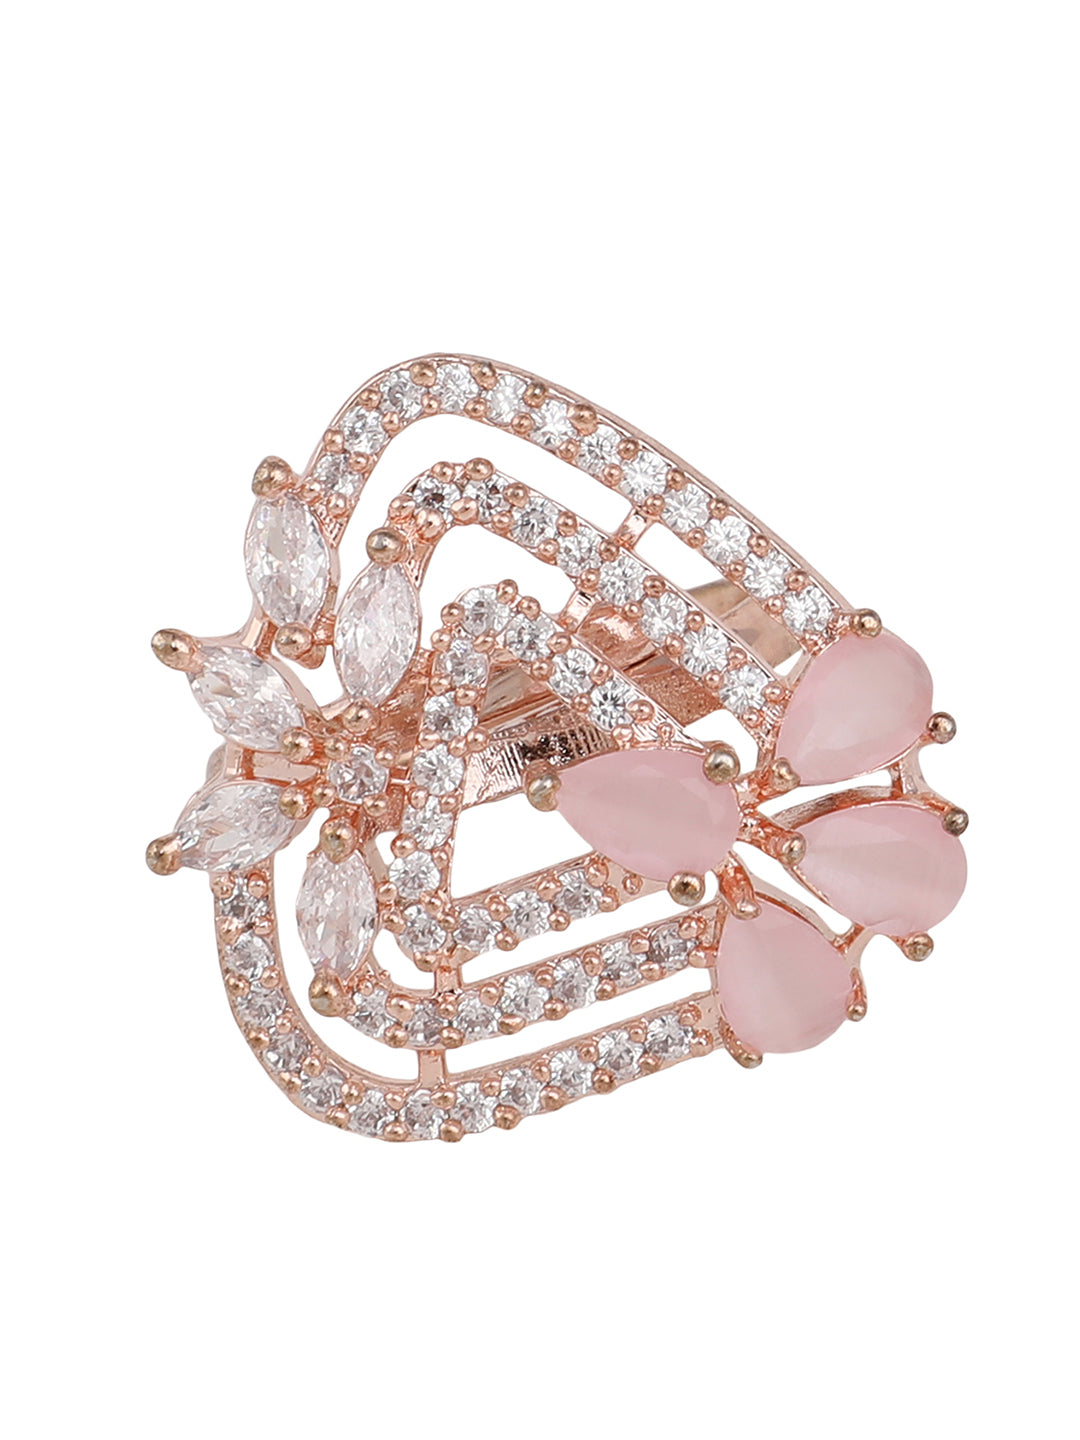 Women's Gold-Plated Pink & White Ad-Studded Adjustable Finger Ring - Anikas Creation